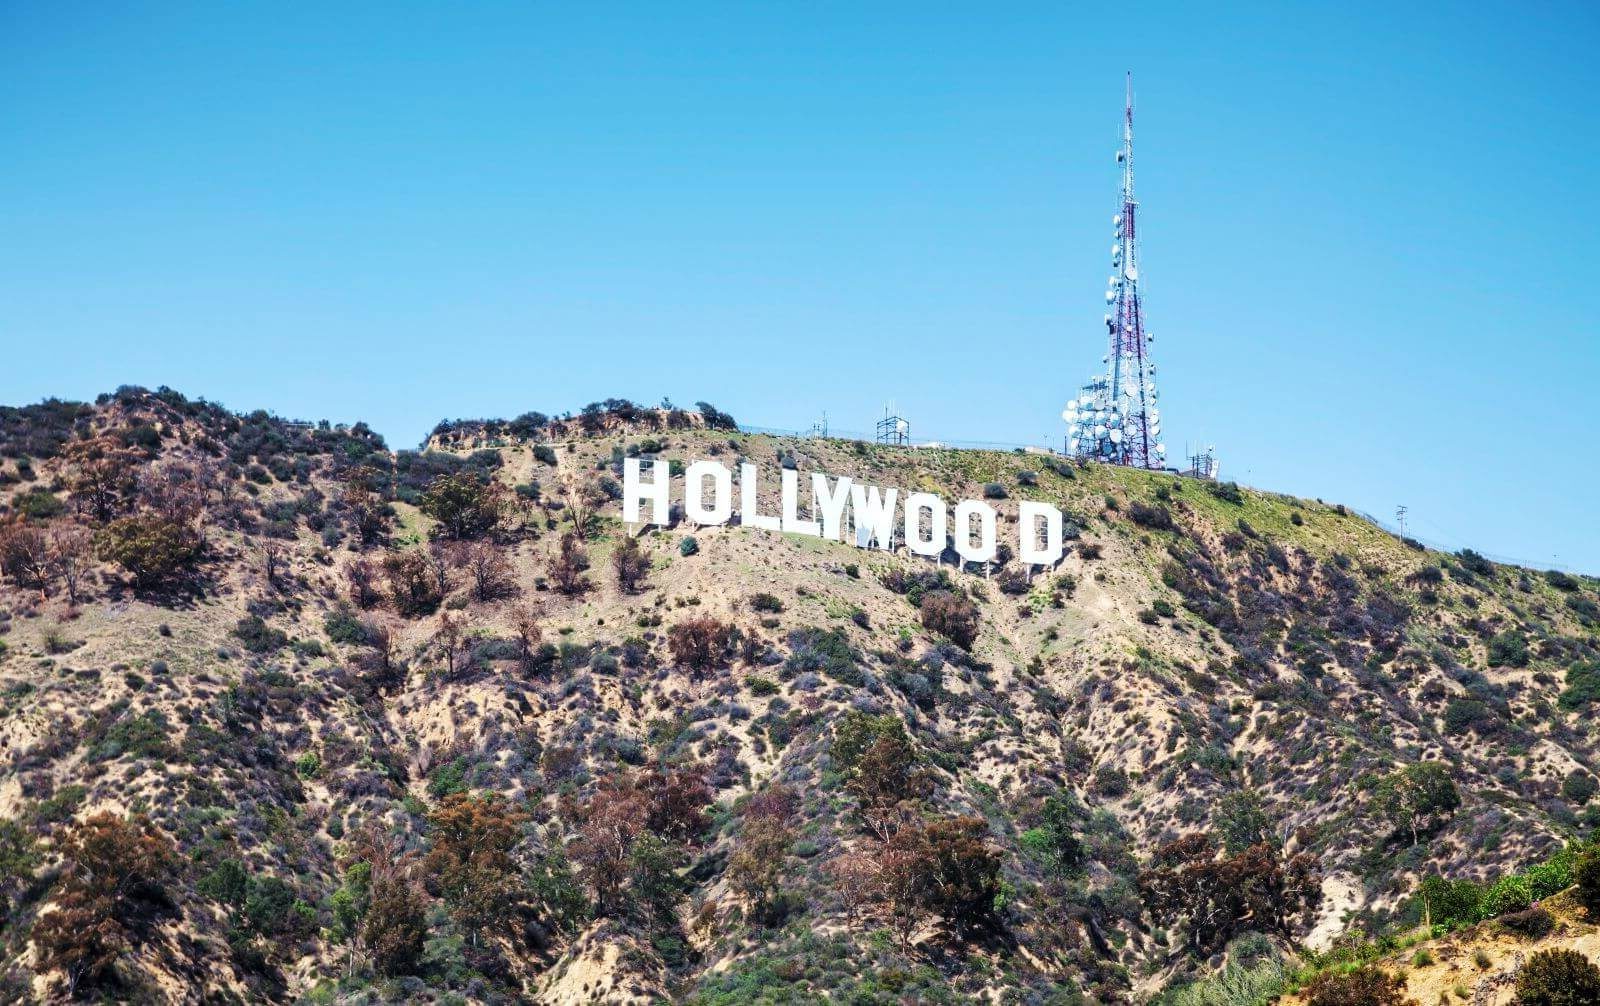 things to do in hollywood